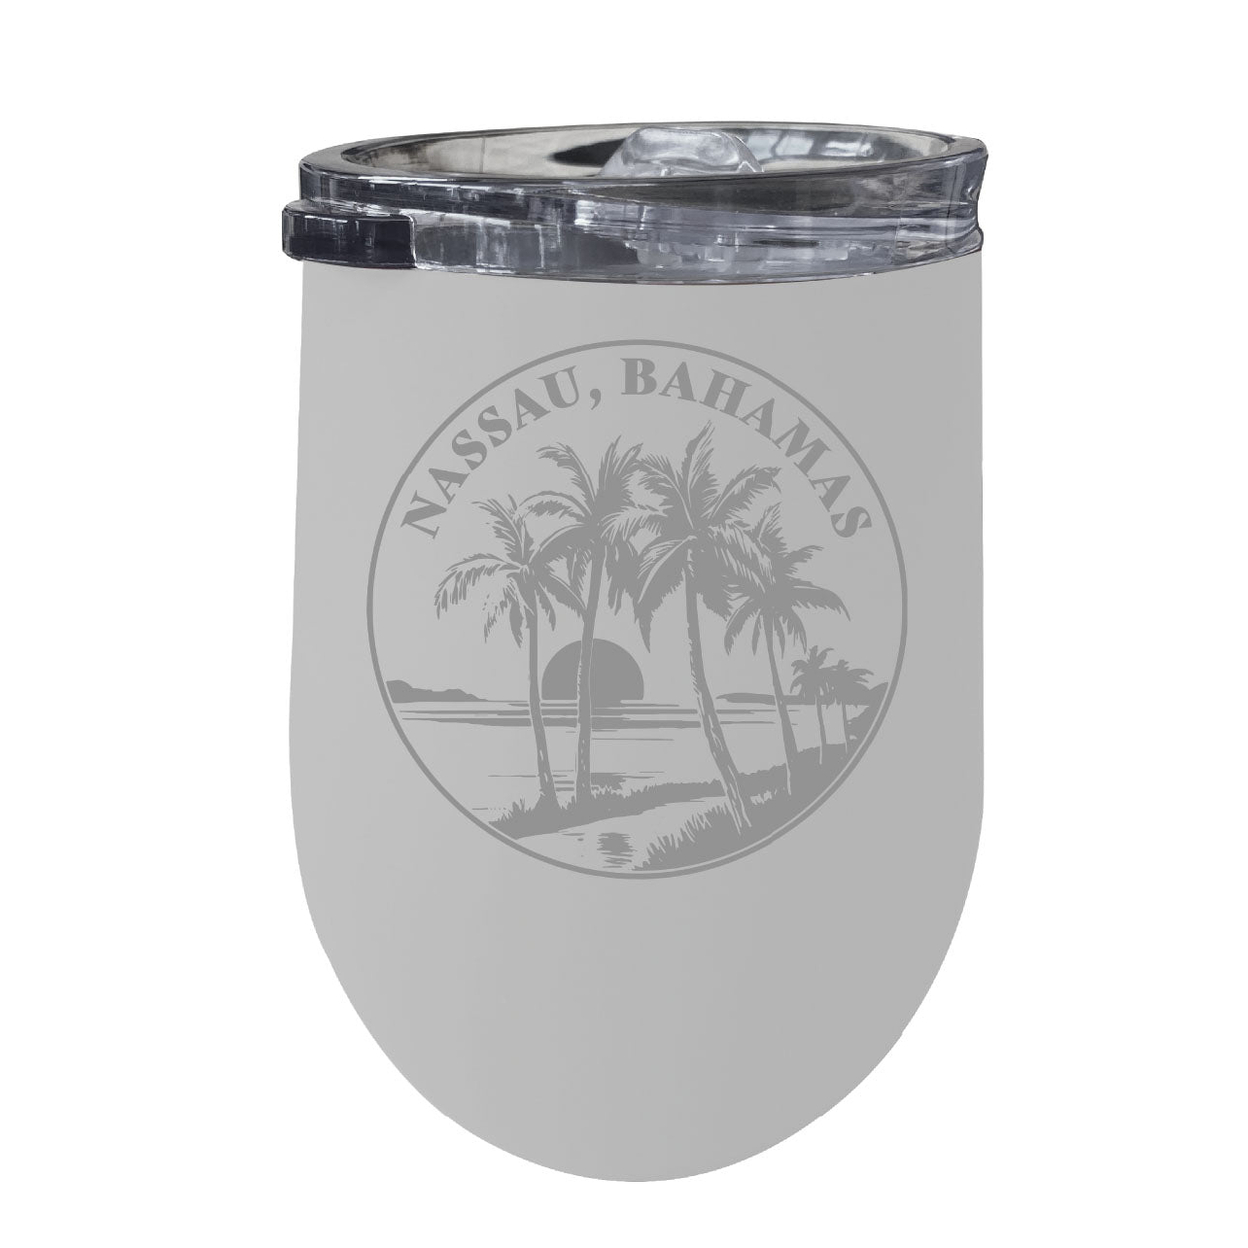 Nassau The Bahamas Souvenir 12 Oz Engraved Insulated Wine Stainless Steel Tumbler - White,,2-Pack